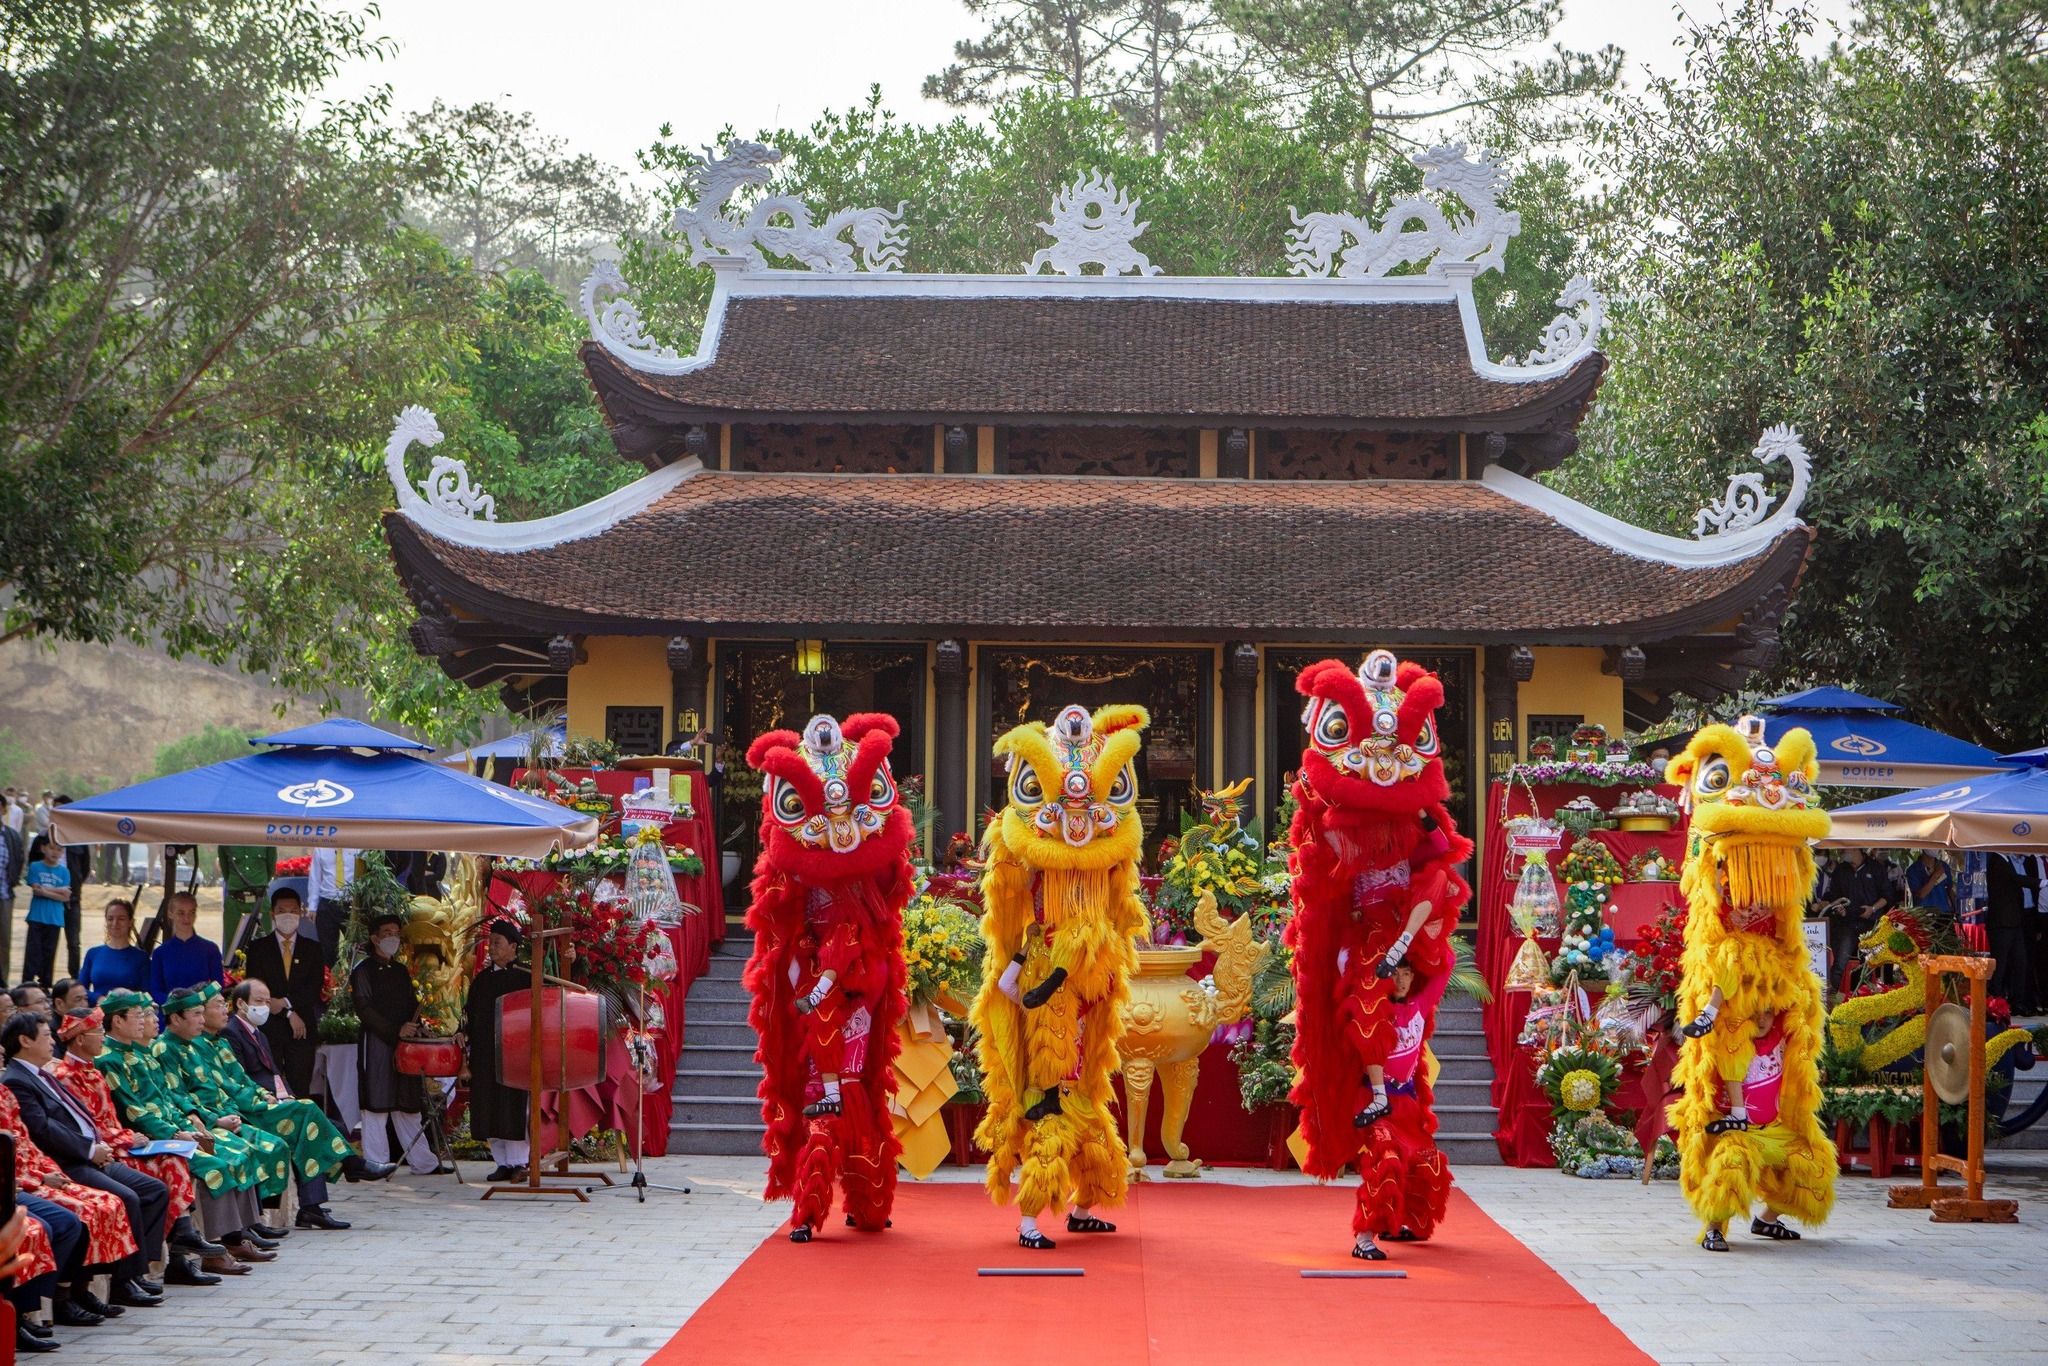 The popular lion dance performance on the occasion of the Ancestor's Anniversary is performed at U Lac Temple, located in the National Scenic Spot of the Tea Resort Prenn resort.